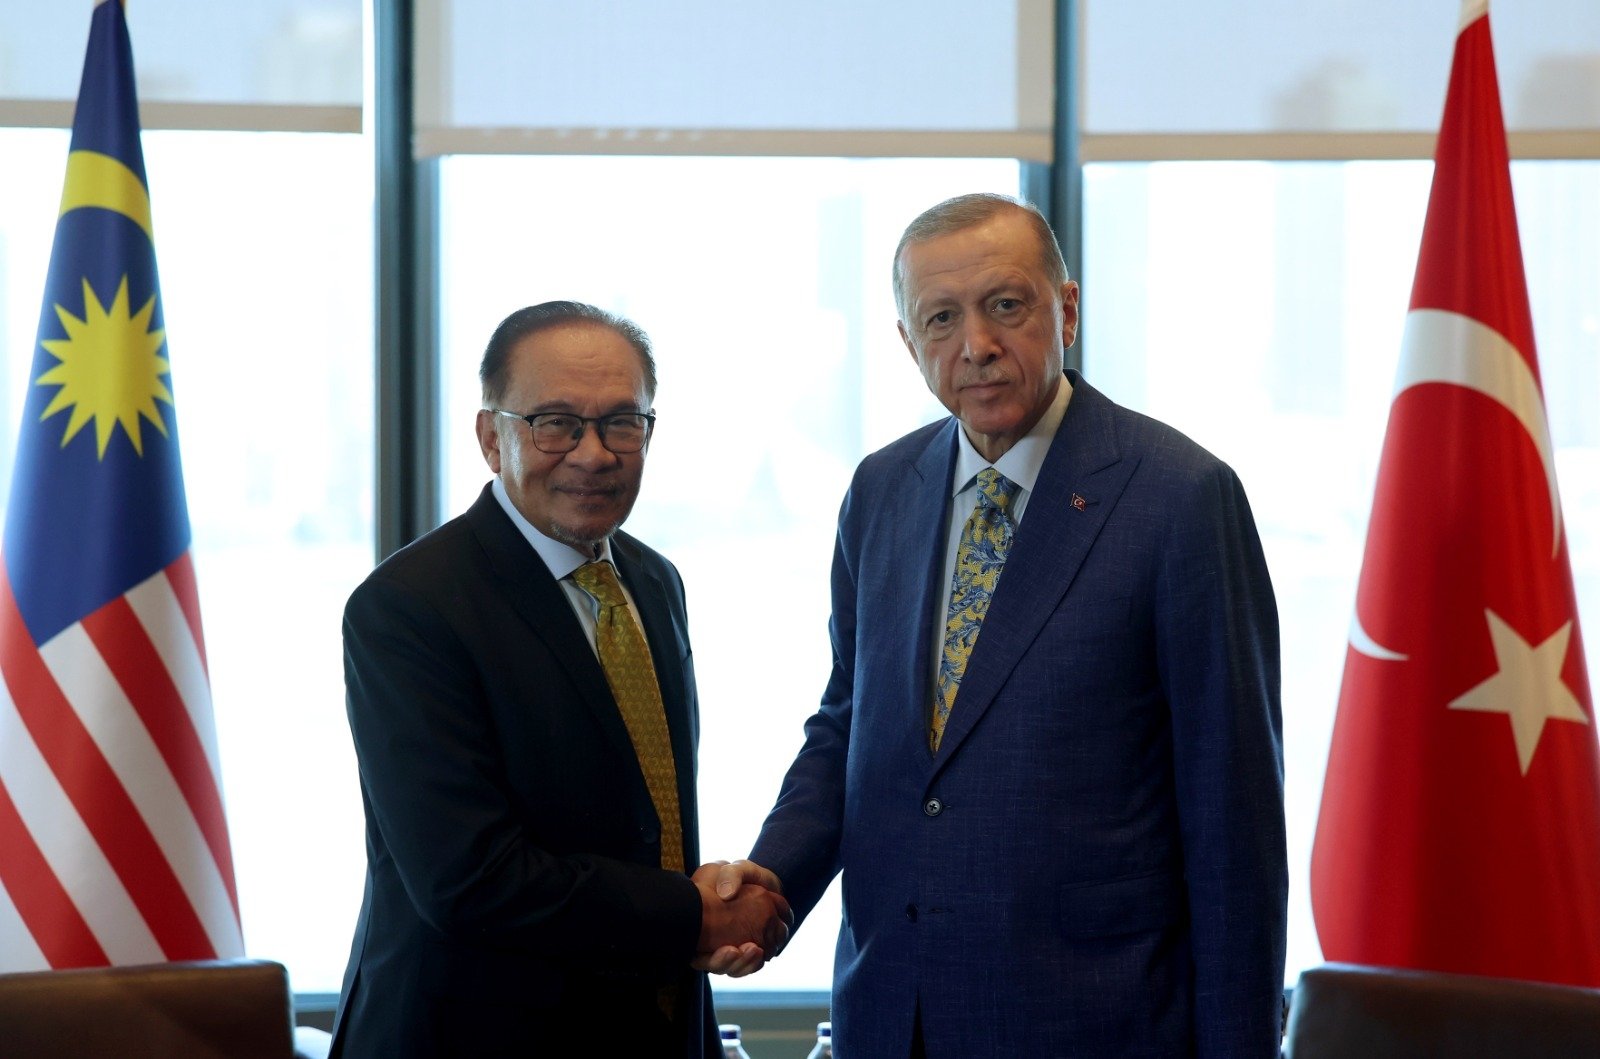 President Recep Tayyip Erdoğan (R) shakes hands with Malaysian Prime Minister Anwar Ibrahim at the Turkish House (Türkevi) in New York, U.S., Sept. 19, 2023. (DHA Photo)